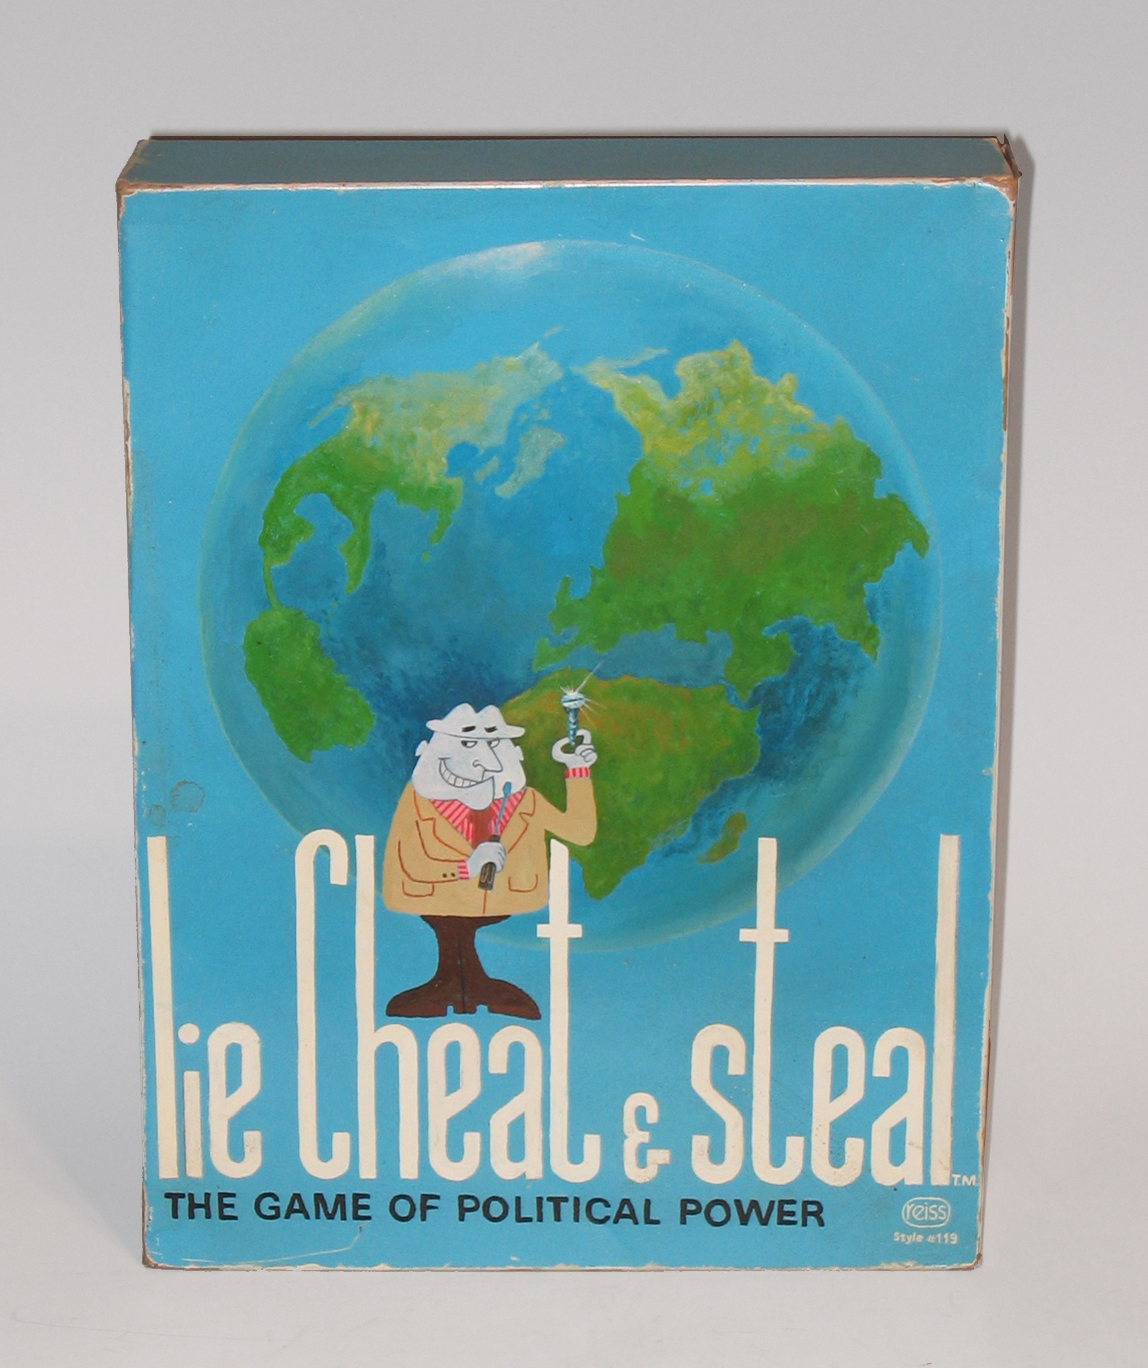 Tim Liddy, Lie Cheat and Steal (1971) The Game of Political Power  Oil and enamel on copper, plywood back  2006